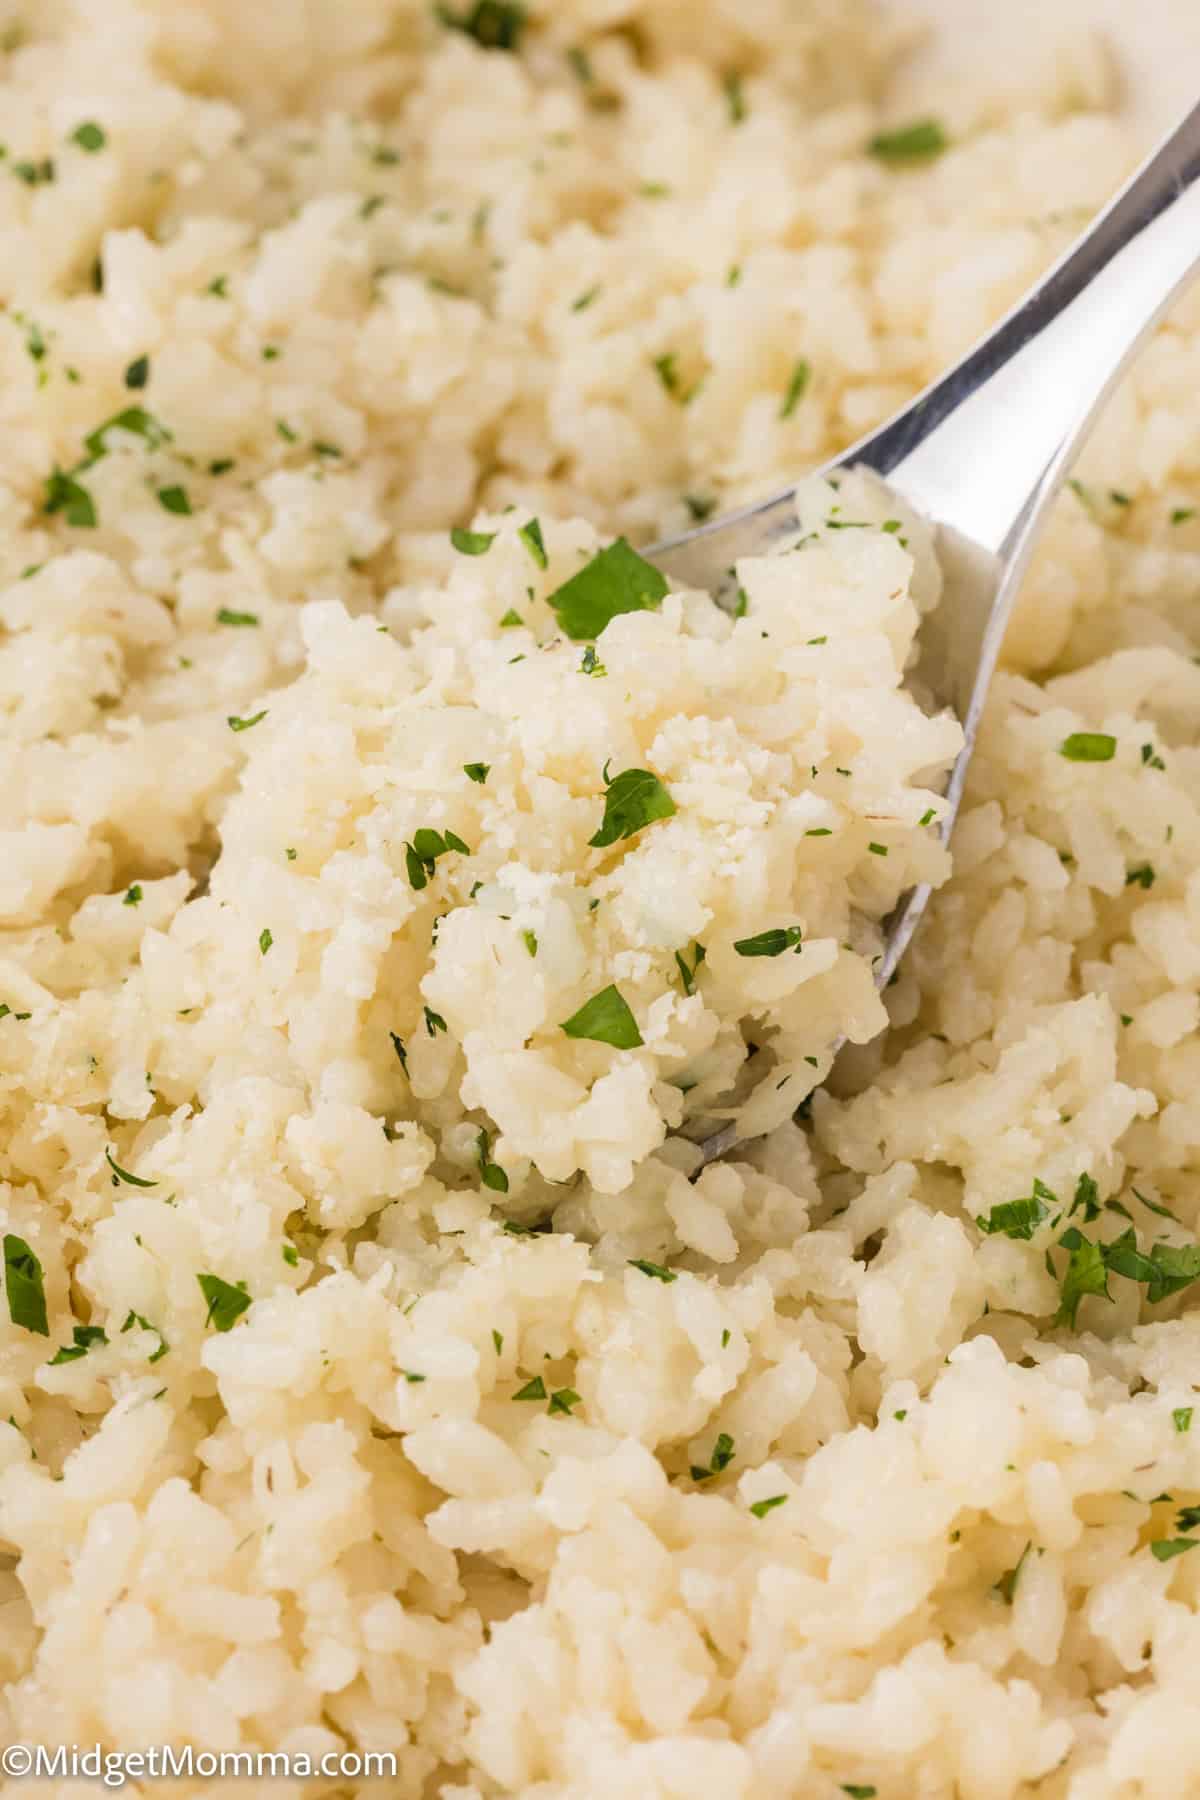 A close-up image of parmesan garlic rice garnished with chopped parsley, with a fork partially in it.